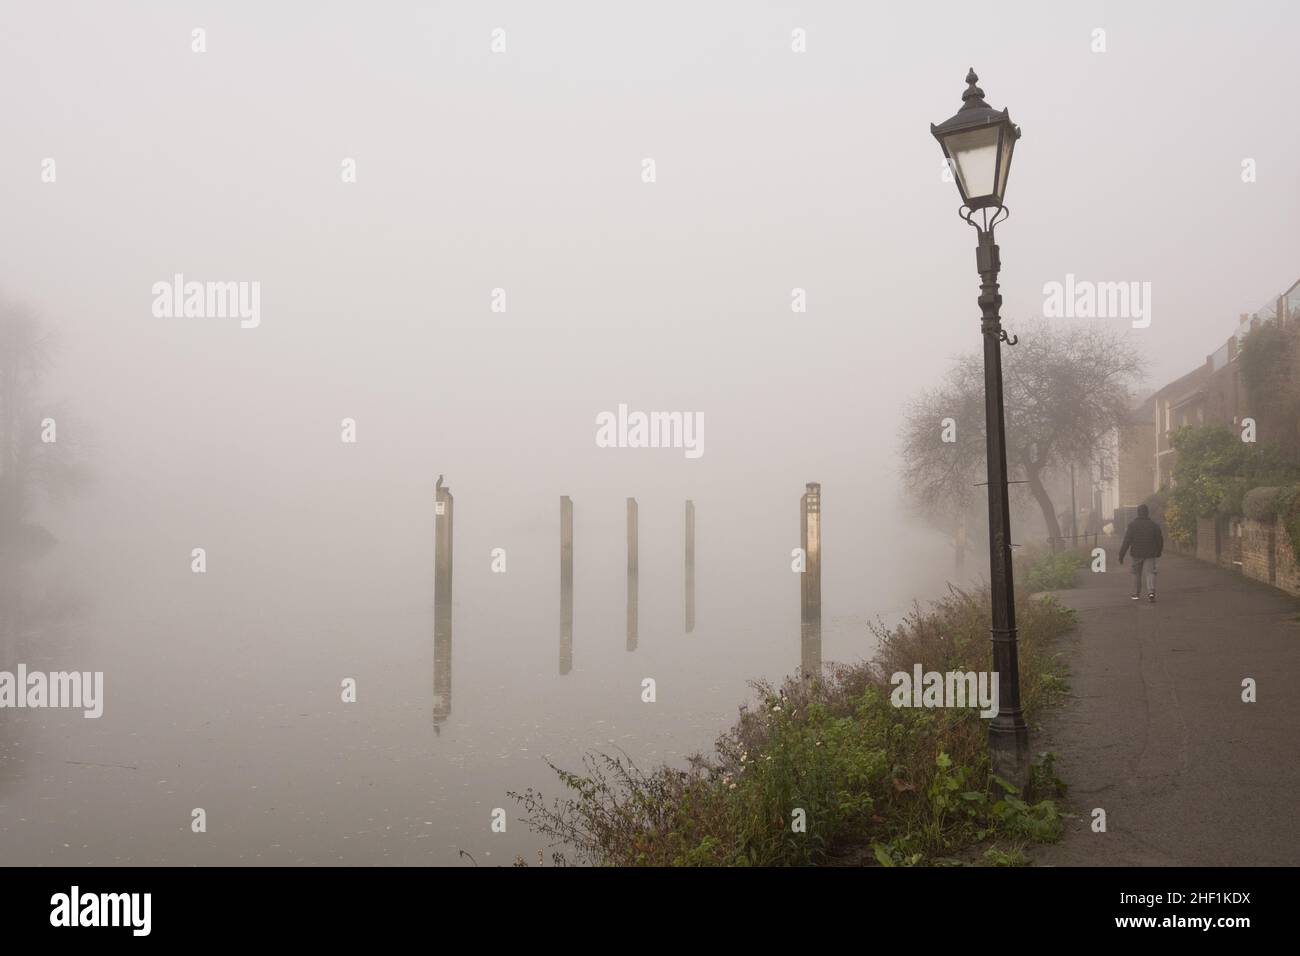 London, England, UK. 13 January 2022.  A foggy day at the Strand-on-The-Green next to the River Thames in London © Benjamin John/ Alamy Live News. Stock Photo